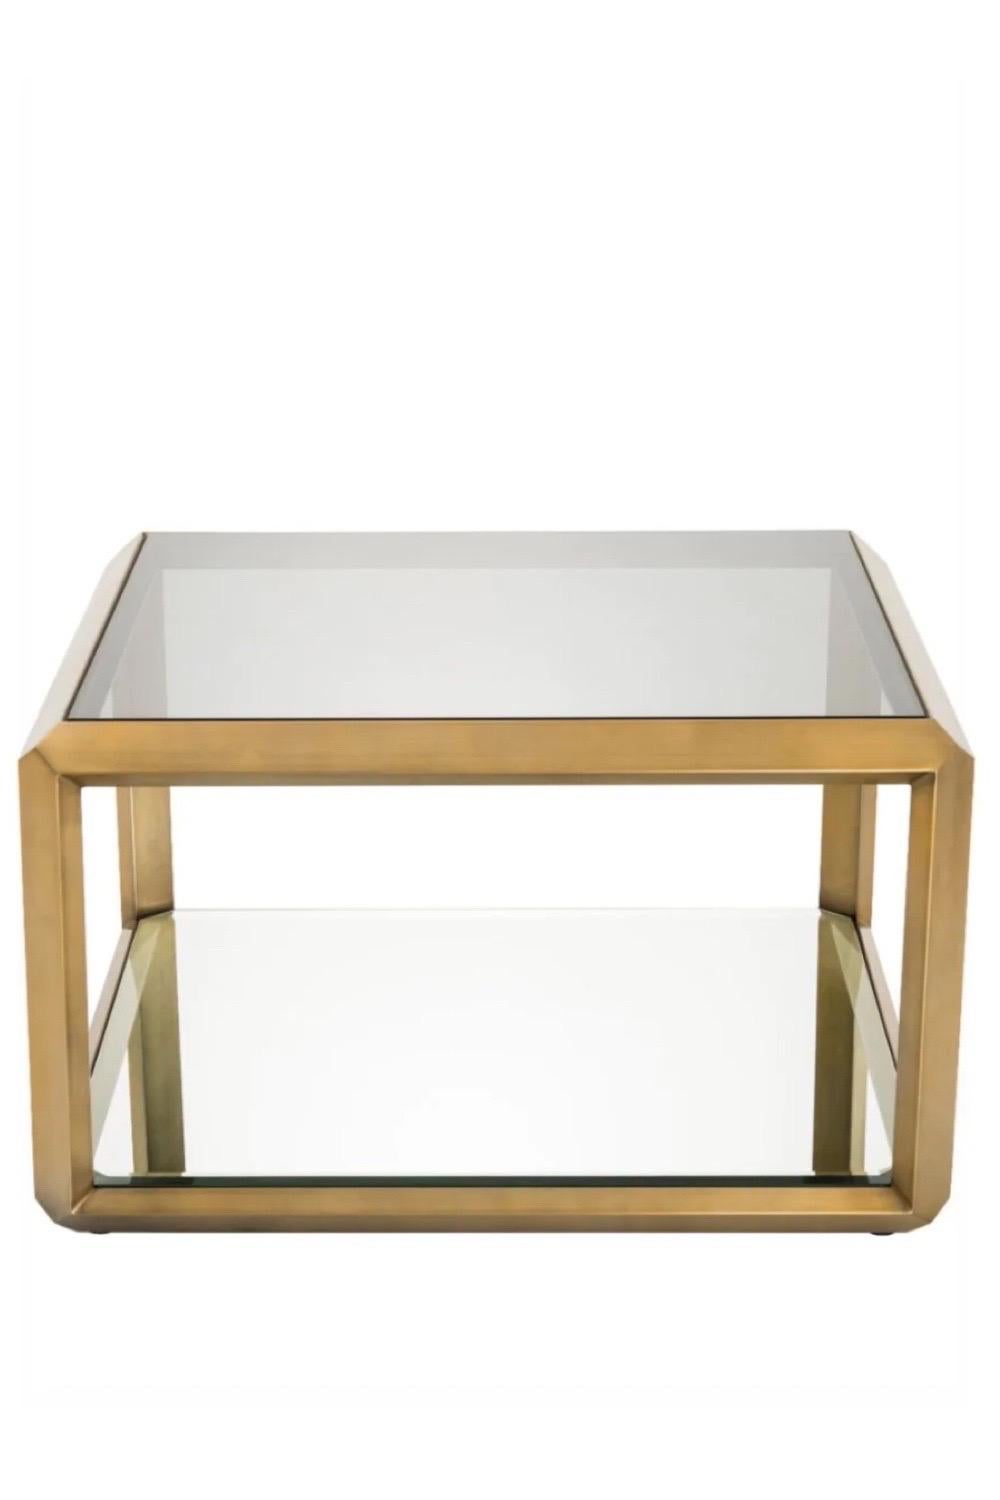 Dutch Eichholtz Callum Brushed Brass and Smoked Glass Square Side Table, a Pair For Sale